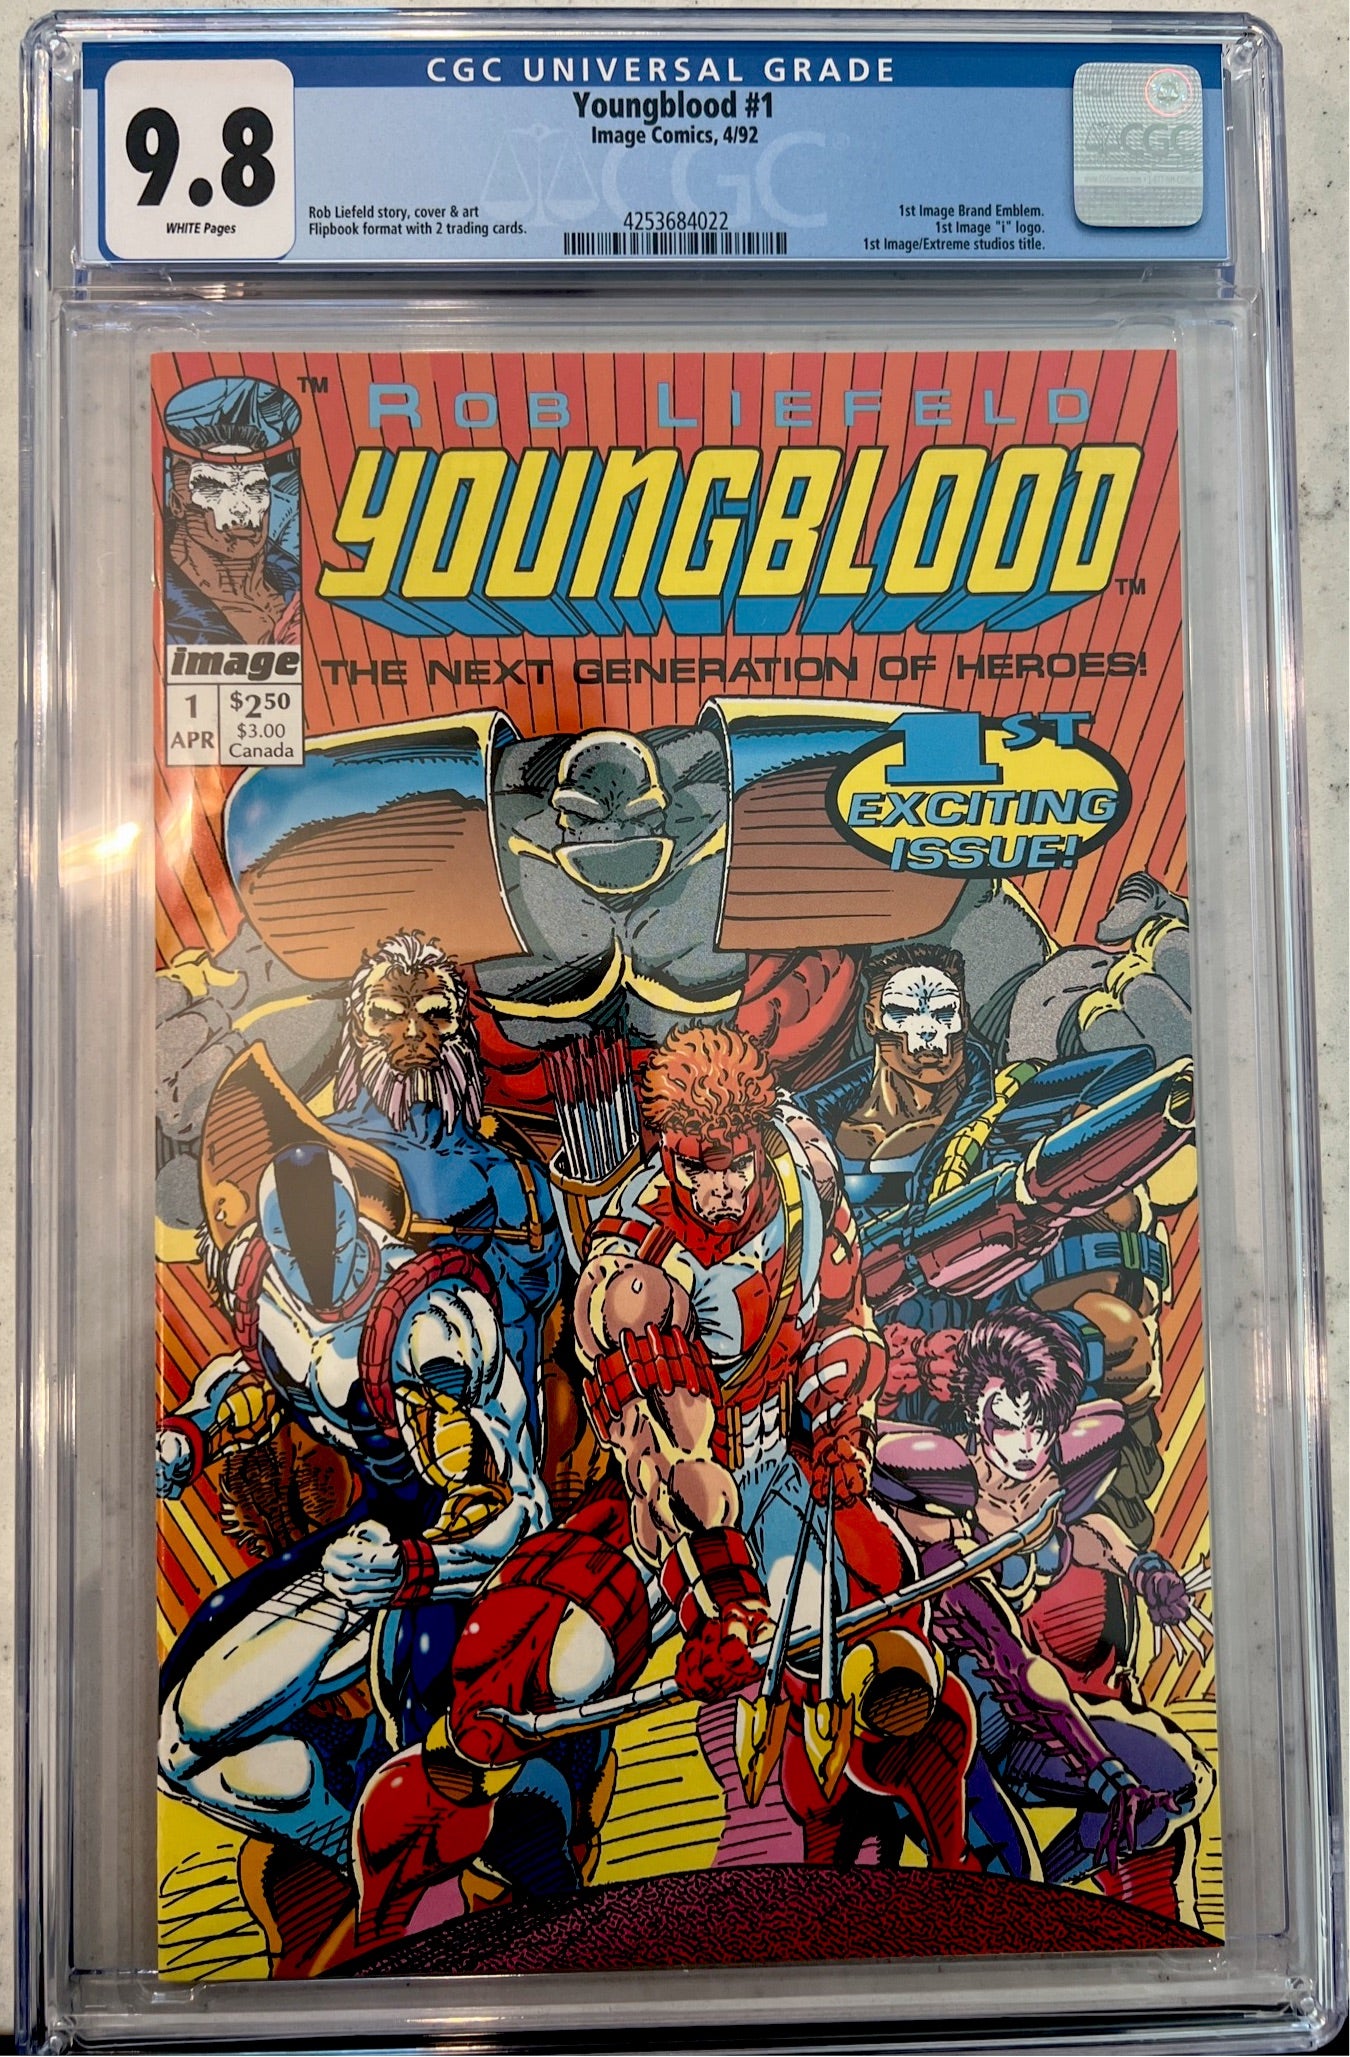 Youngblood #1 CGC 9.8 (First Image “i” logo notated)